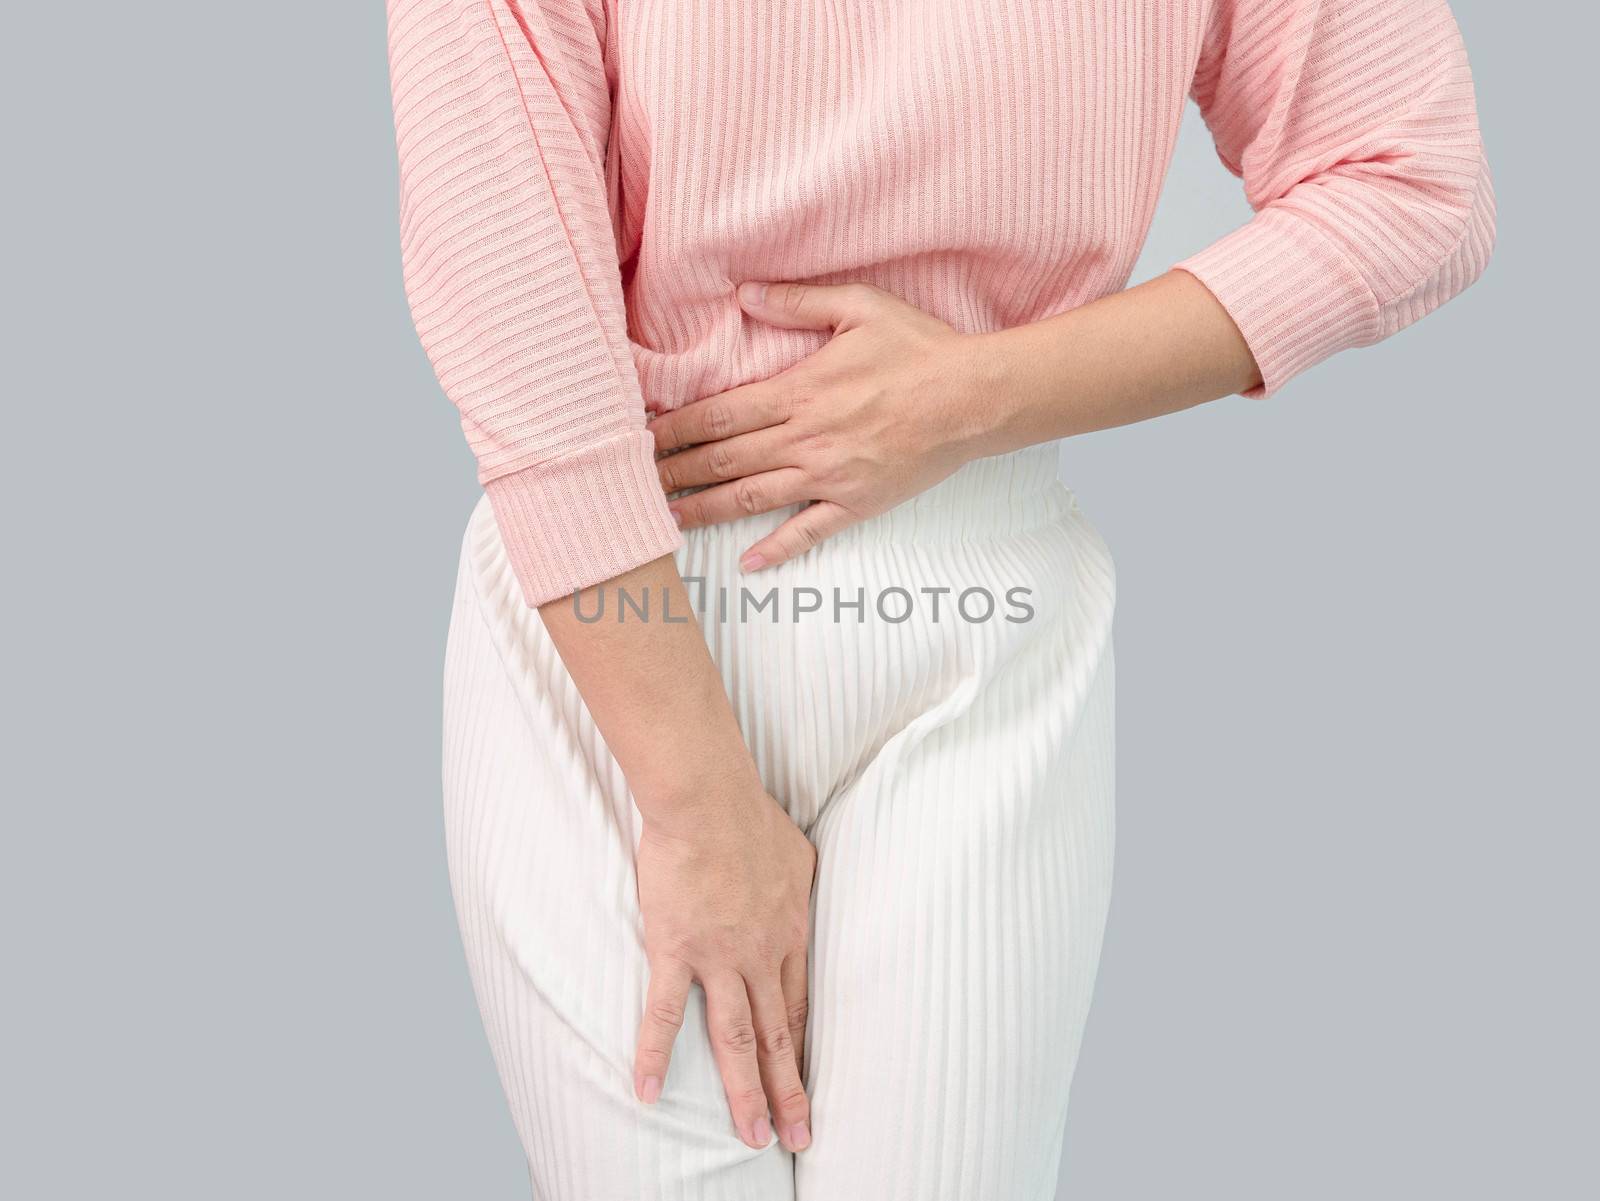 Unhealthy Asian women suffer from abdominal pain, irregular menstruation, isolated on a grey background. by TEERASAK